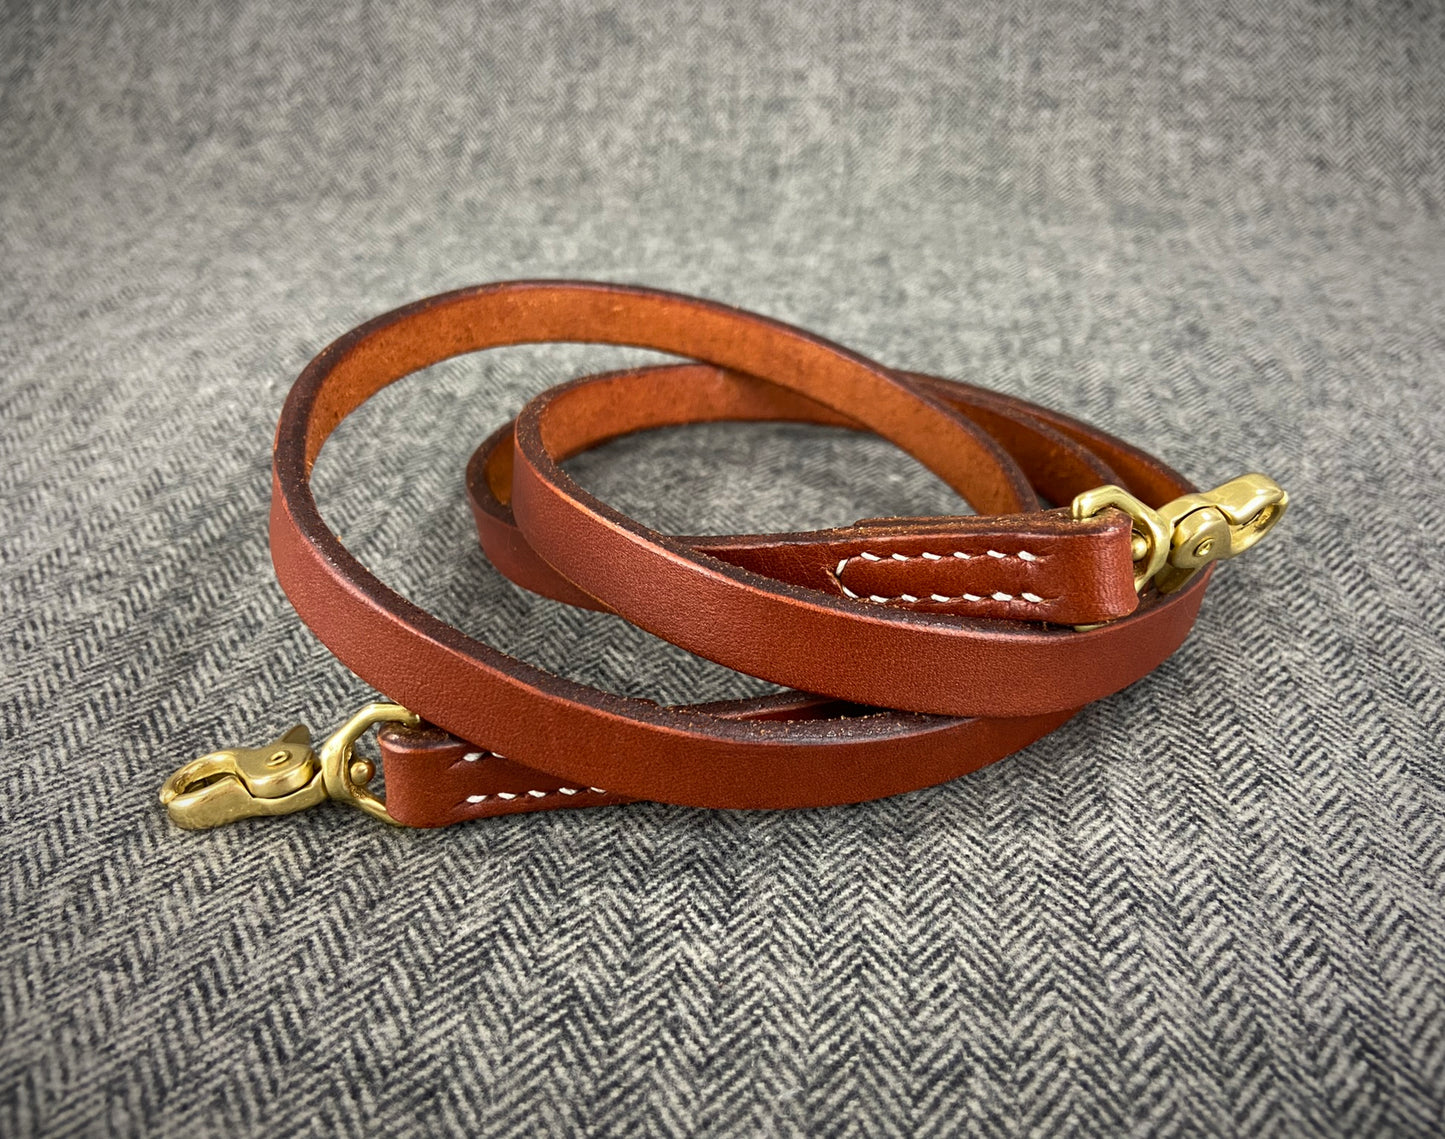 Handcrafted full grain vegetable tanned leather crossbody purse strap made in New Hampshire, USA. Fully hand stitched, solid brass hardware, hand burnished edges.